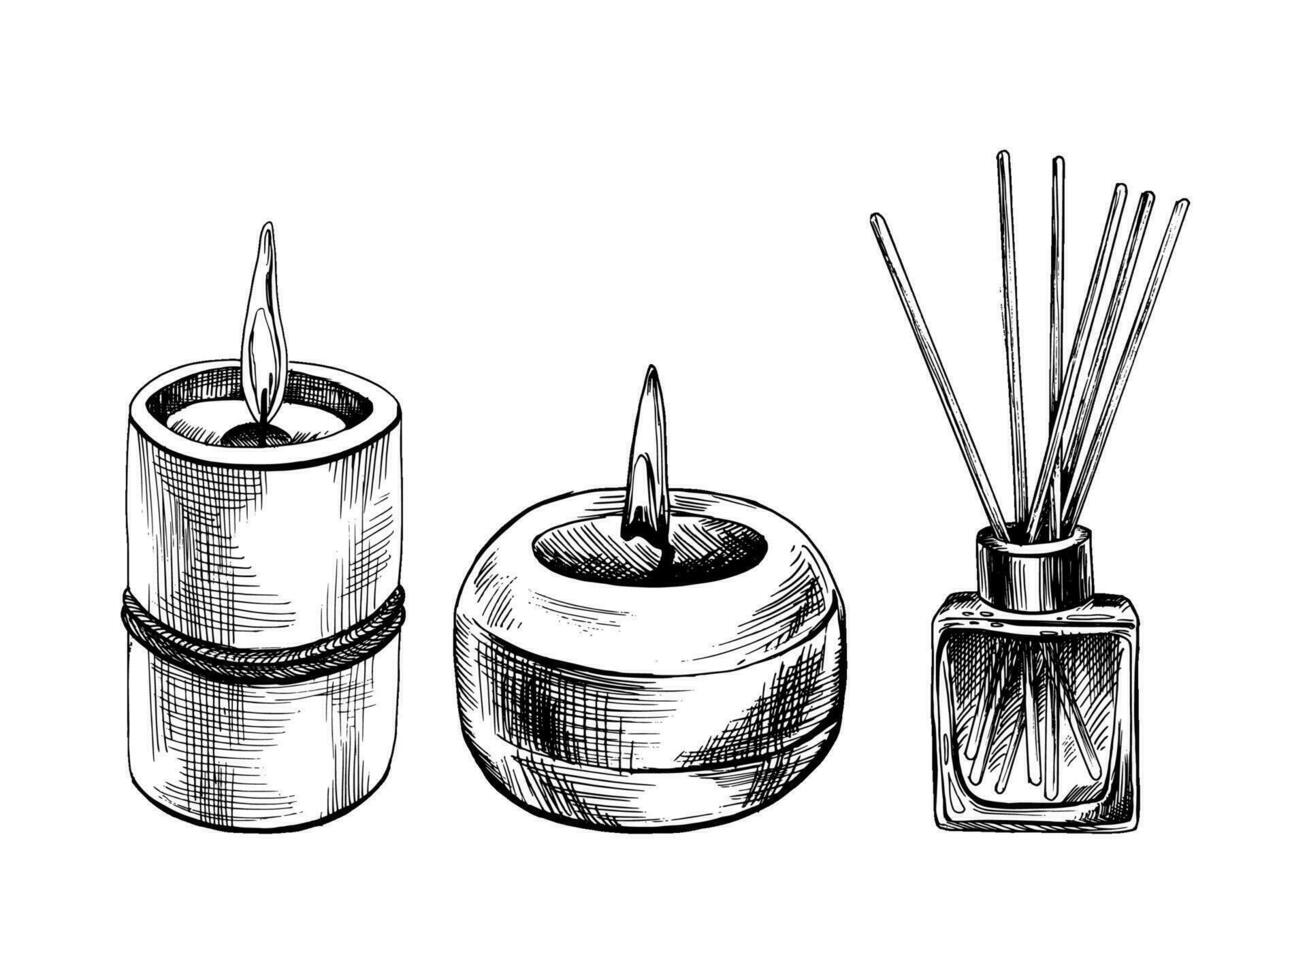 Candles with a flame tied with a rope and a glass square aroma diffuser with sticks. Hand-drawn graphic illustration. EPS vector. Set of isolated objects vector